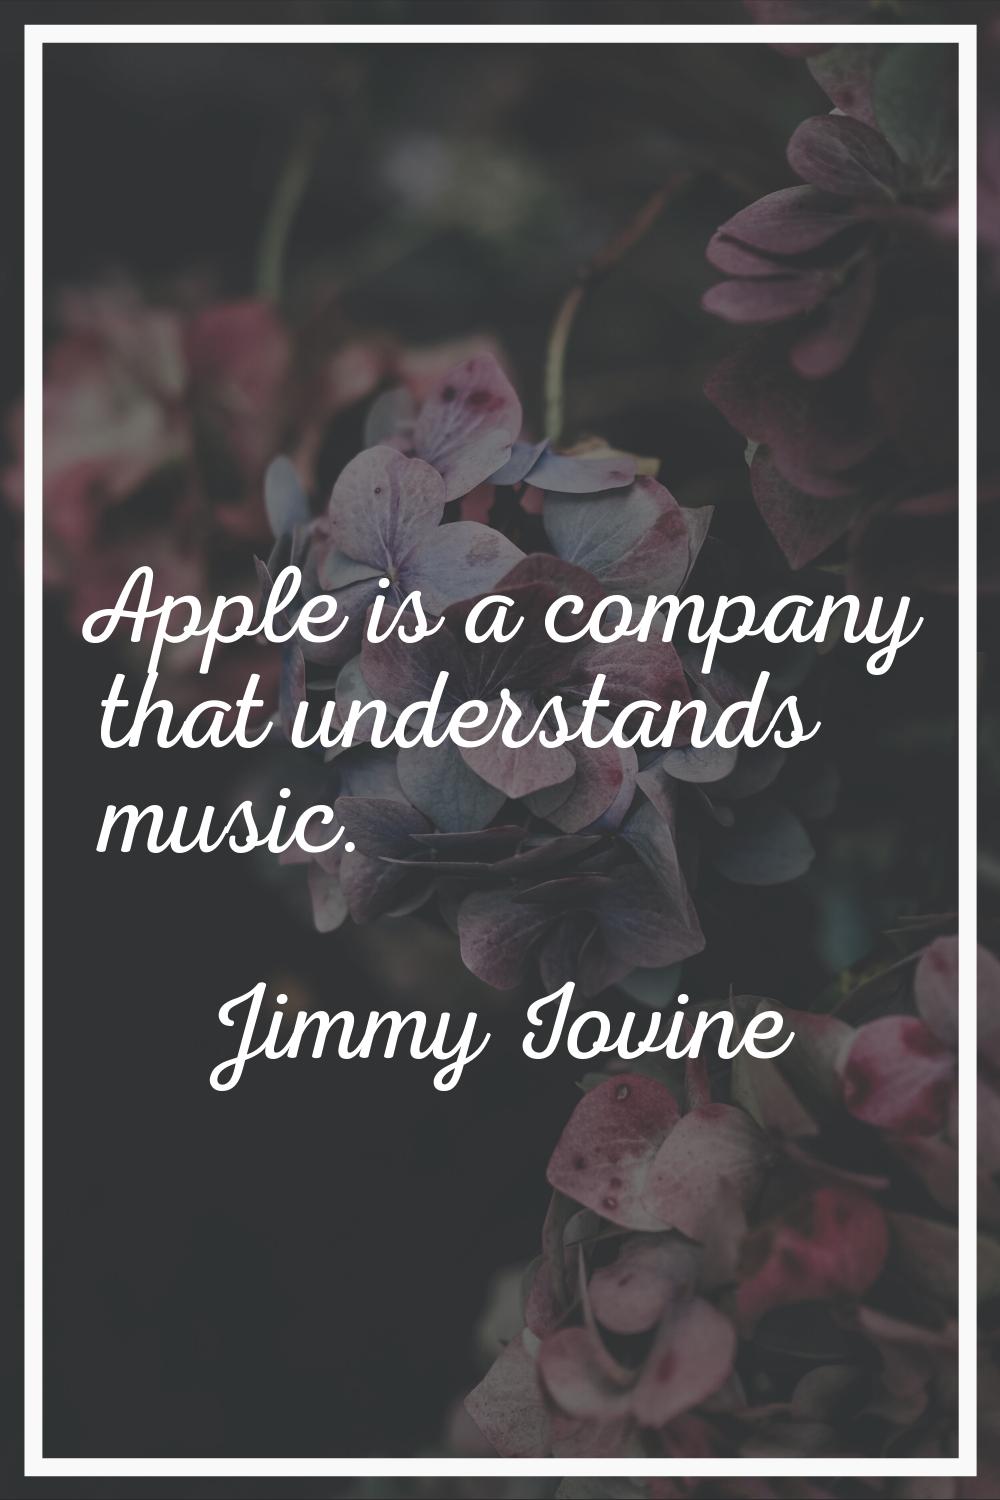 Apple is a company that understands music.